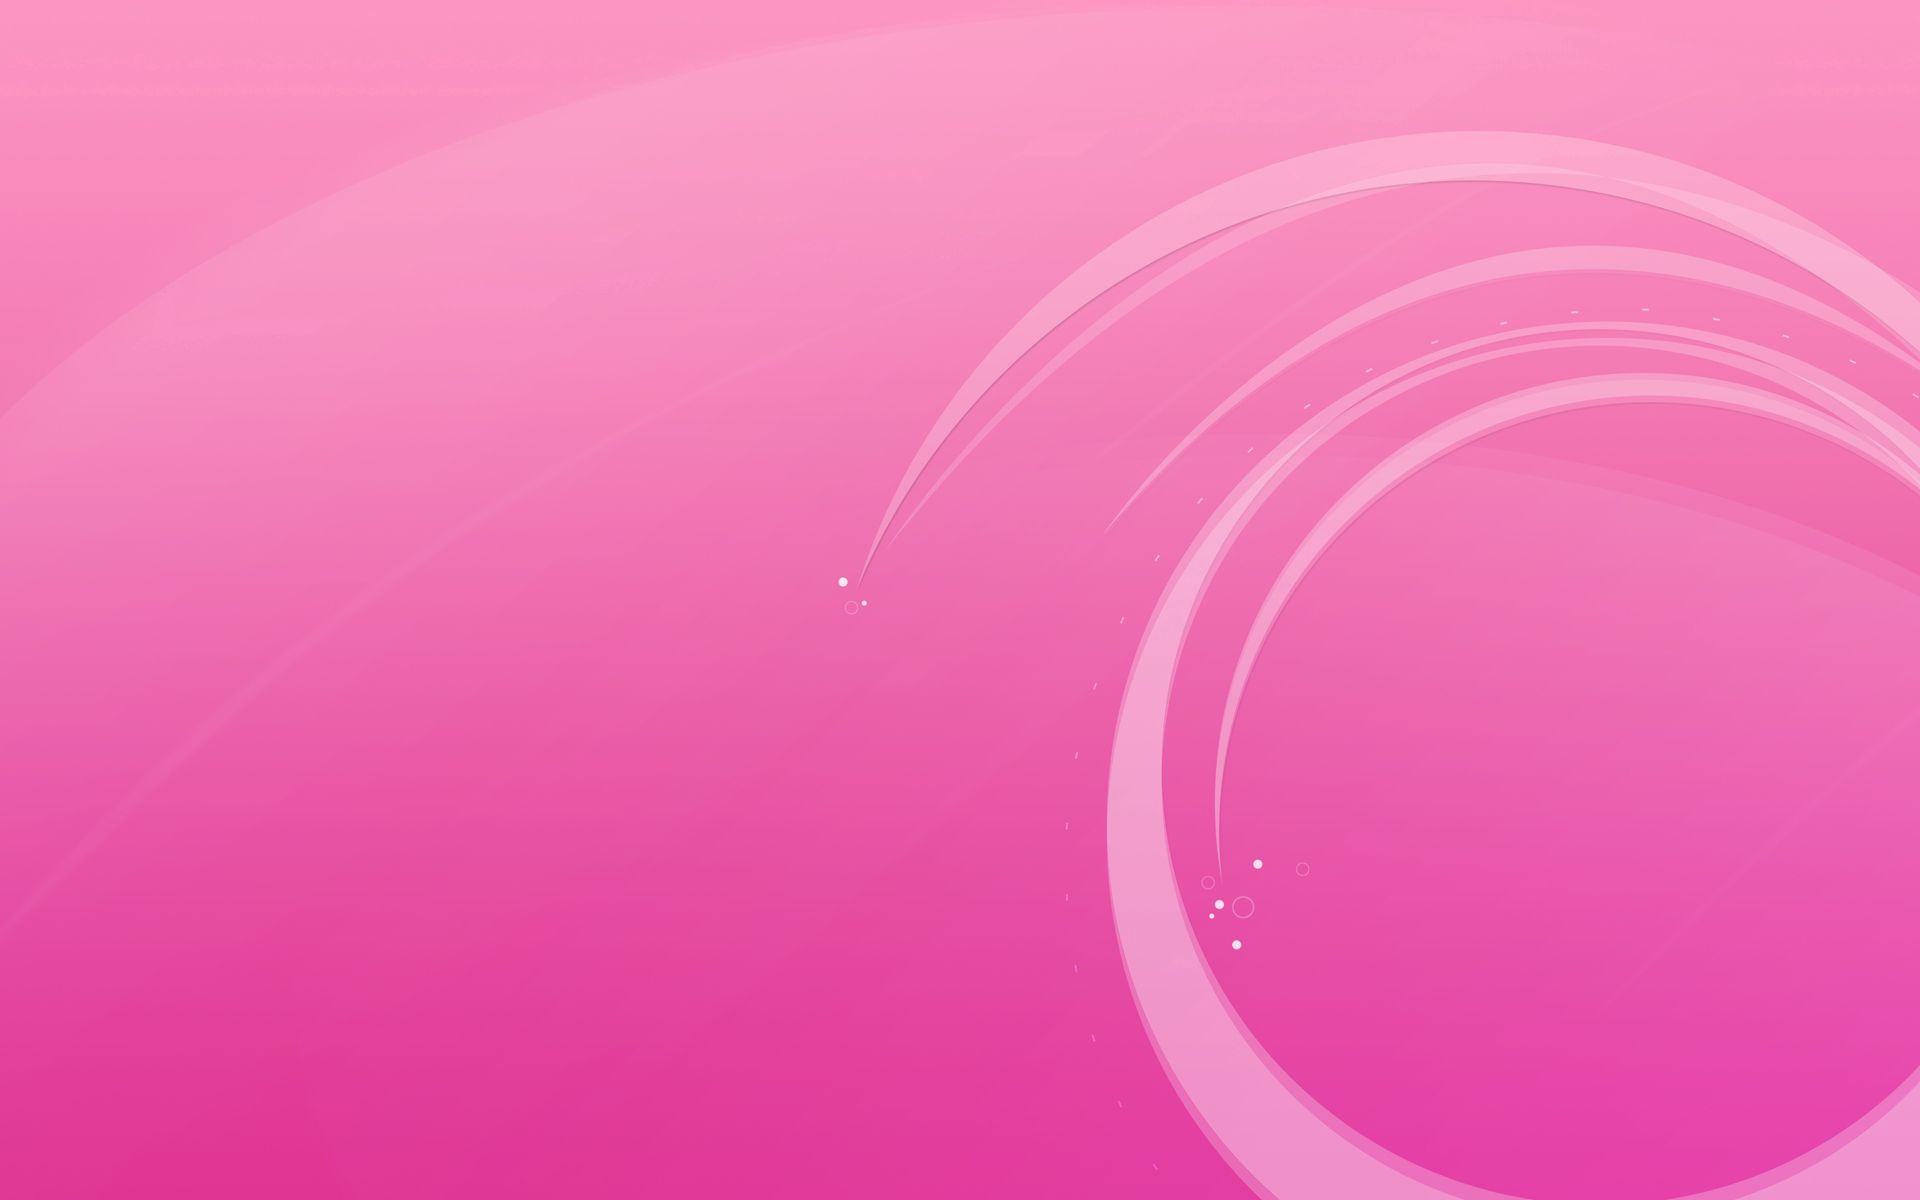 130049 download wallpaper abstract, background, pink, circles, lines, solid screensavers and pictures for free